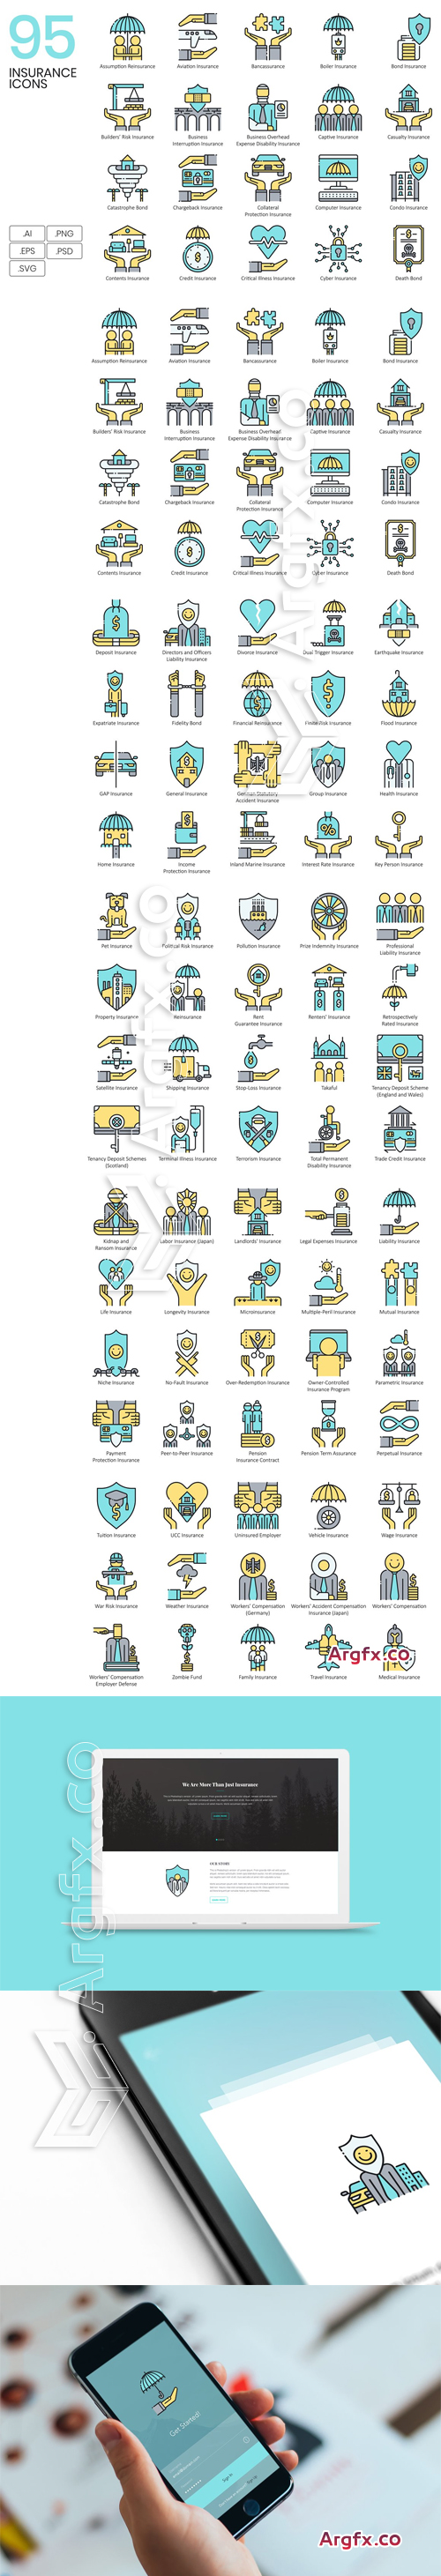 95 Insurance Icons